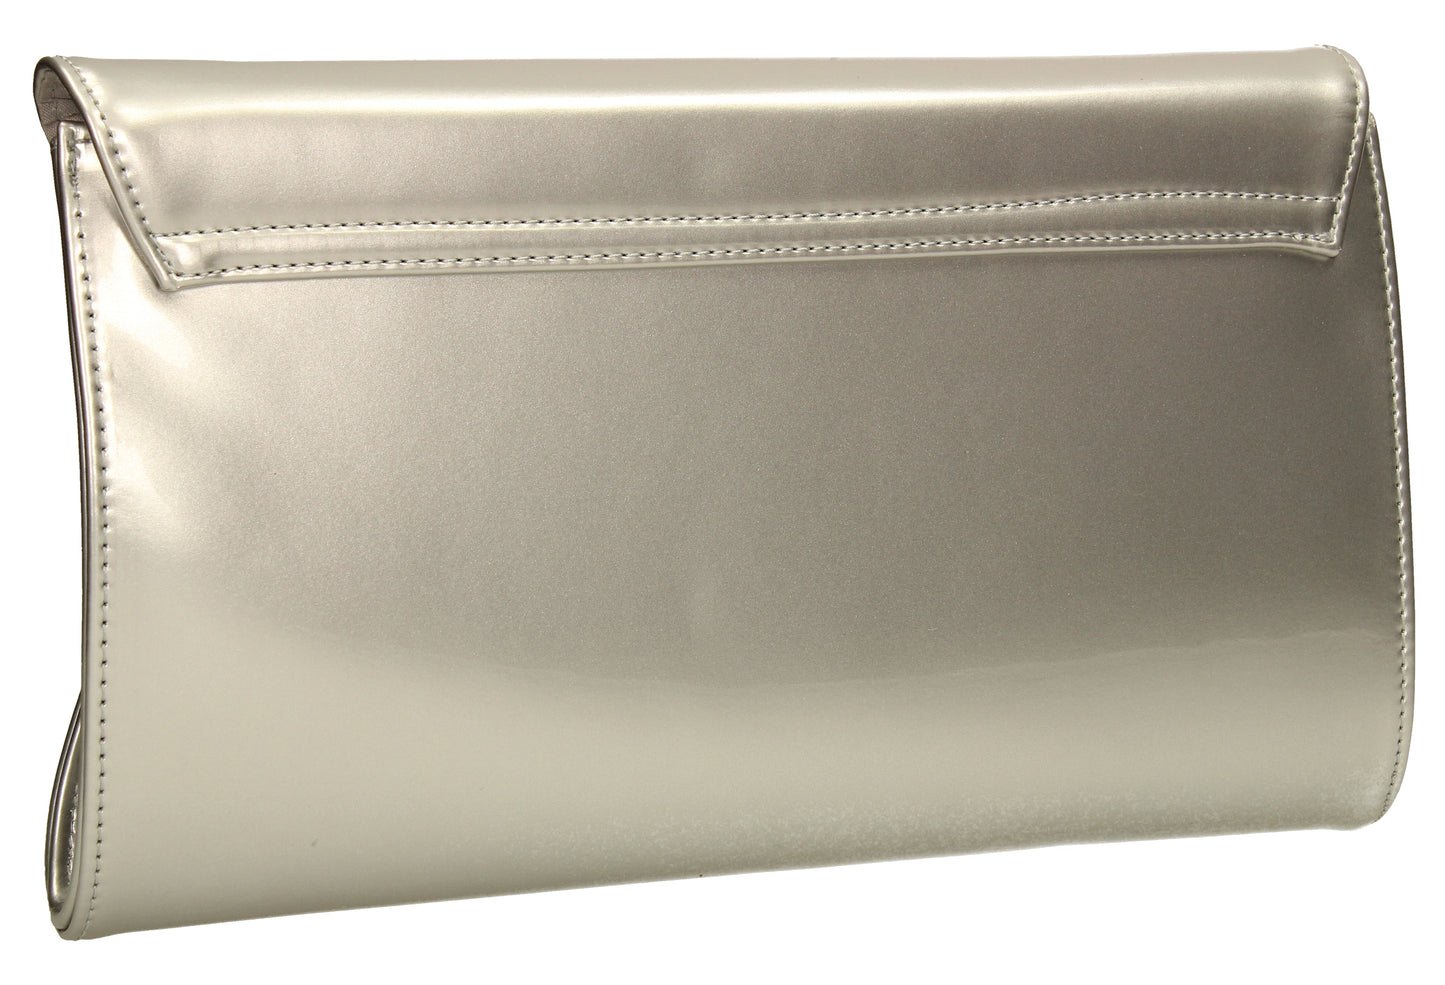 SWANKYSWANS Juliet Patent Envelope Clutch Bag Silver Cute Cheap Clutch Bag For Weddings School and Work